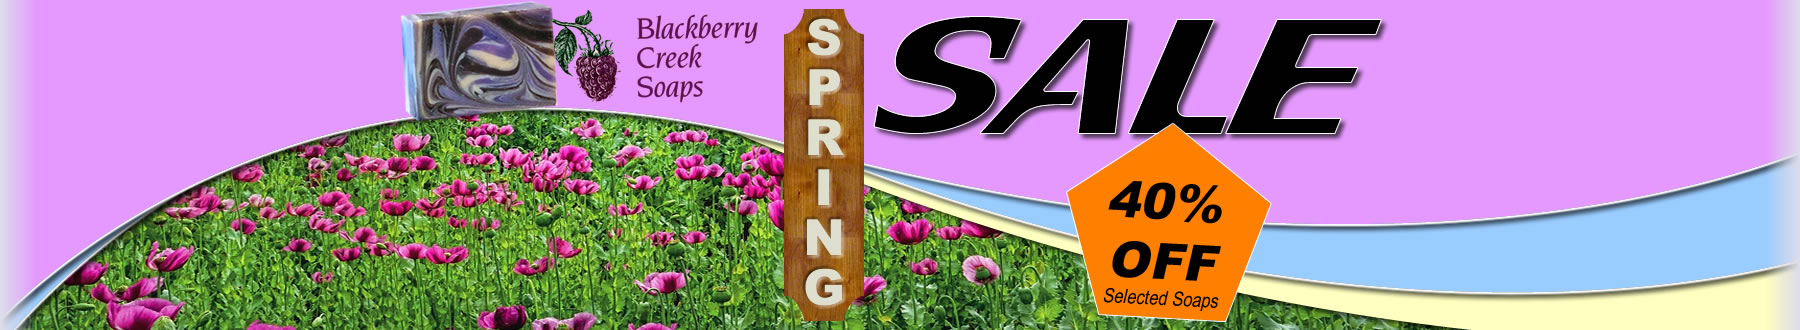 Spring Sale - 40% off selected soaps